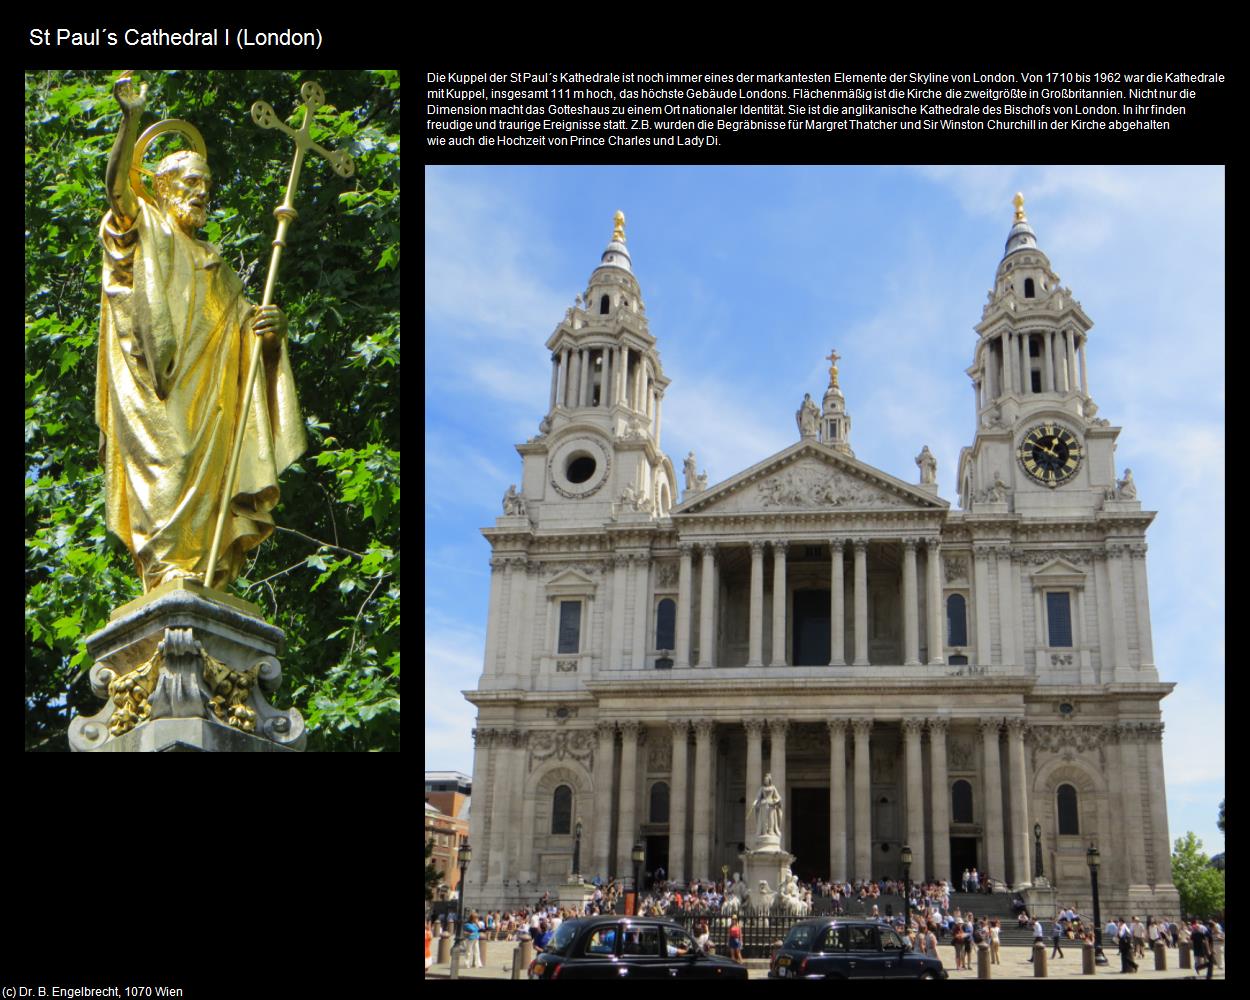 St Paul‘s Cathedral I (London, England) in Kulturatlas-ENGLAND und WALES